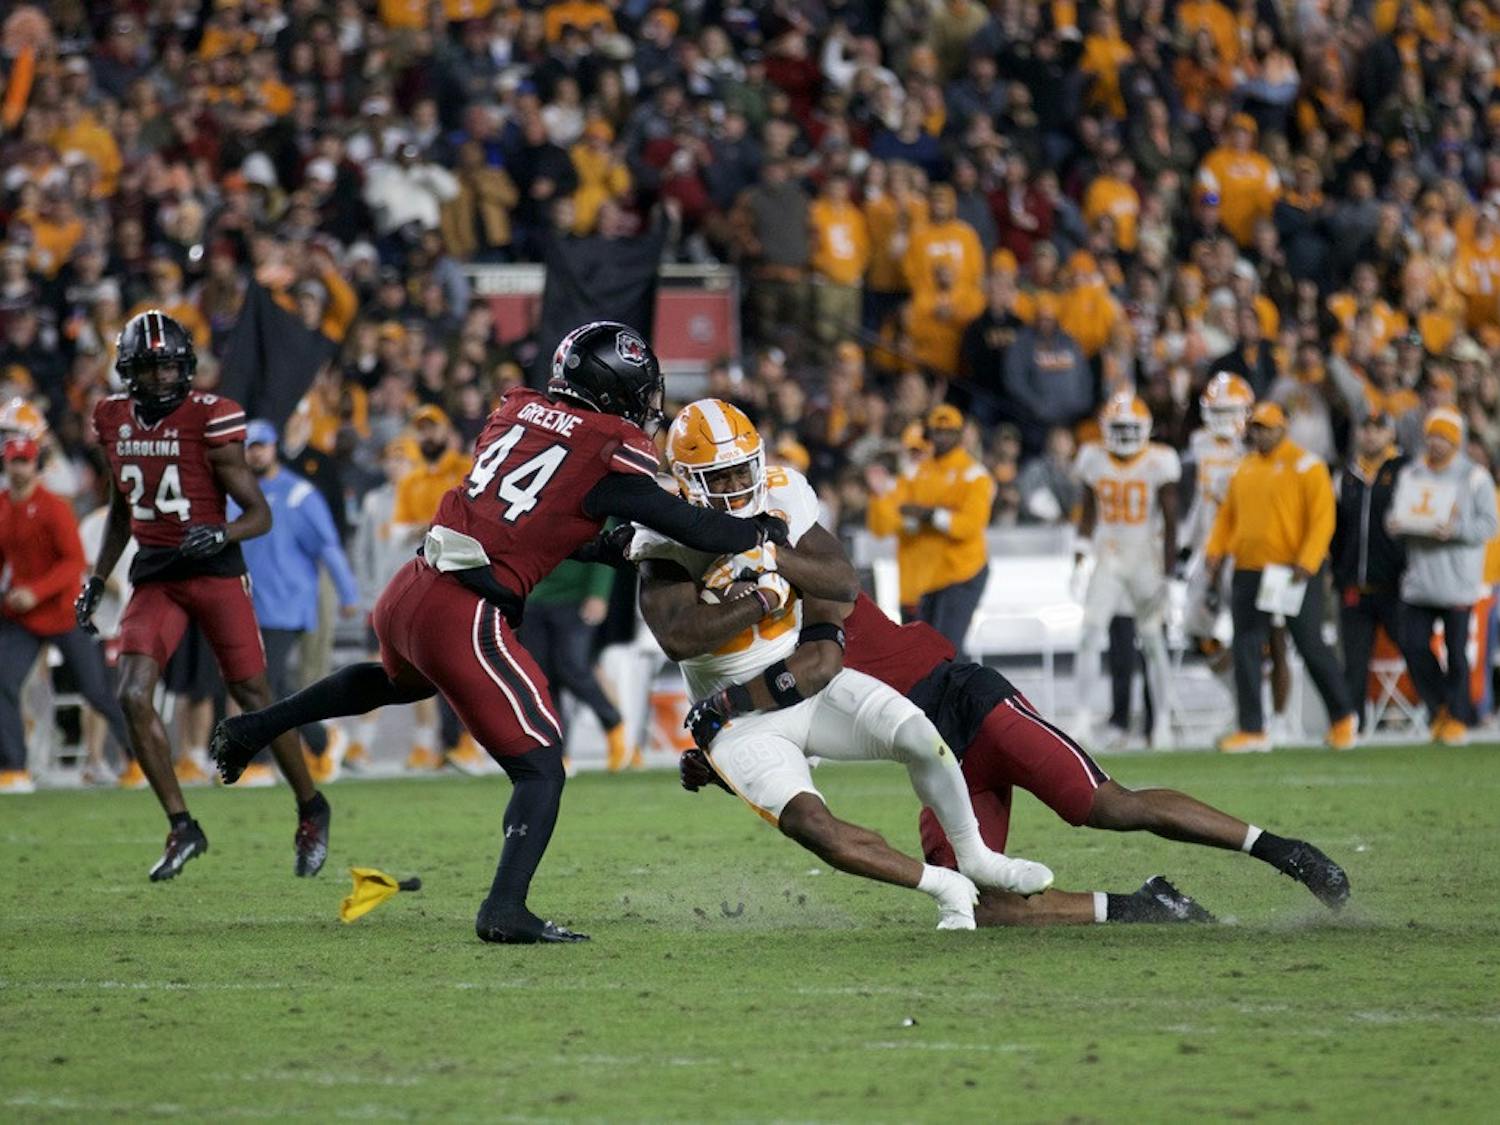 Sixth year linebacker Sherrod Greene brings down a Tennessee running back on Nov. 19, 2022. The Gamecocks went on to beat the Volunteers 63-38. &nbsp;